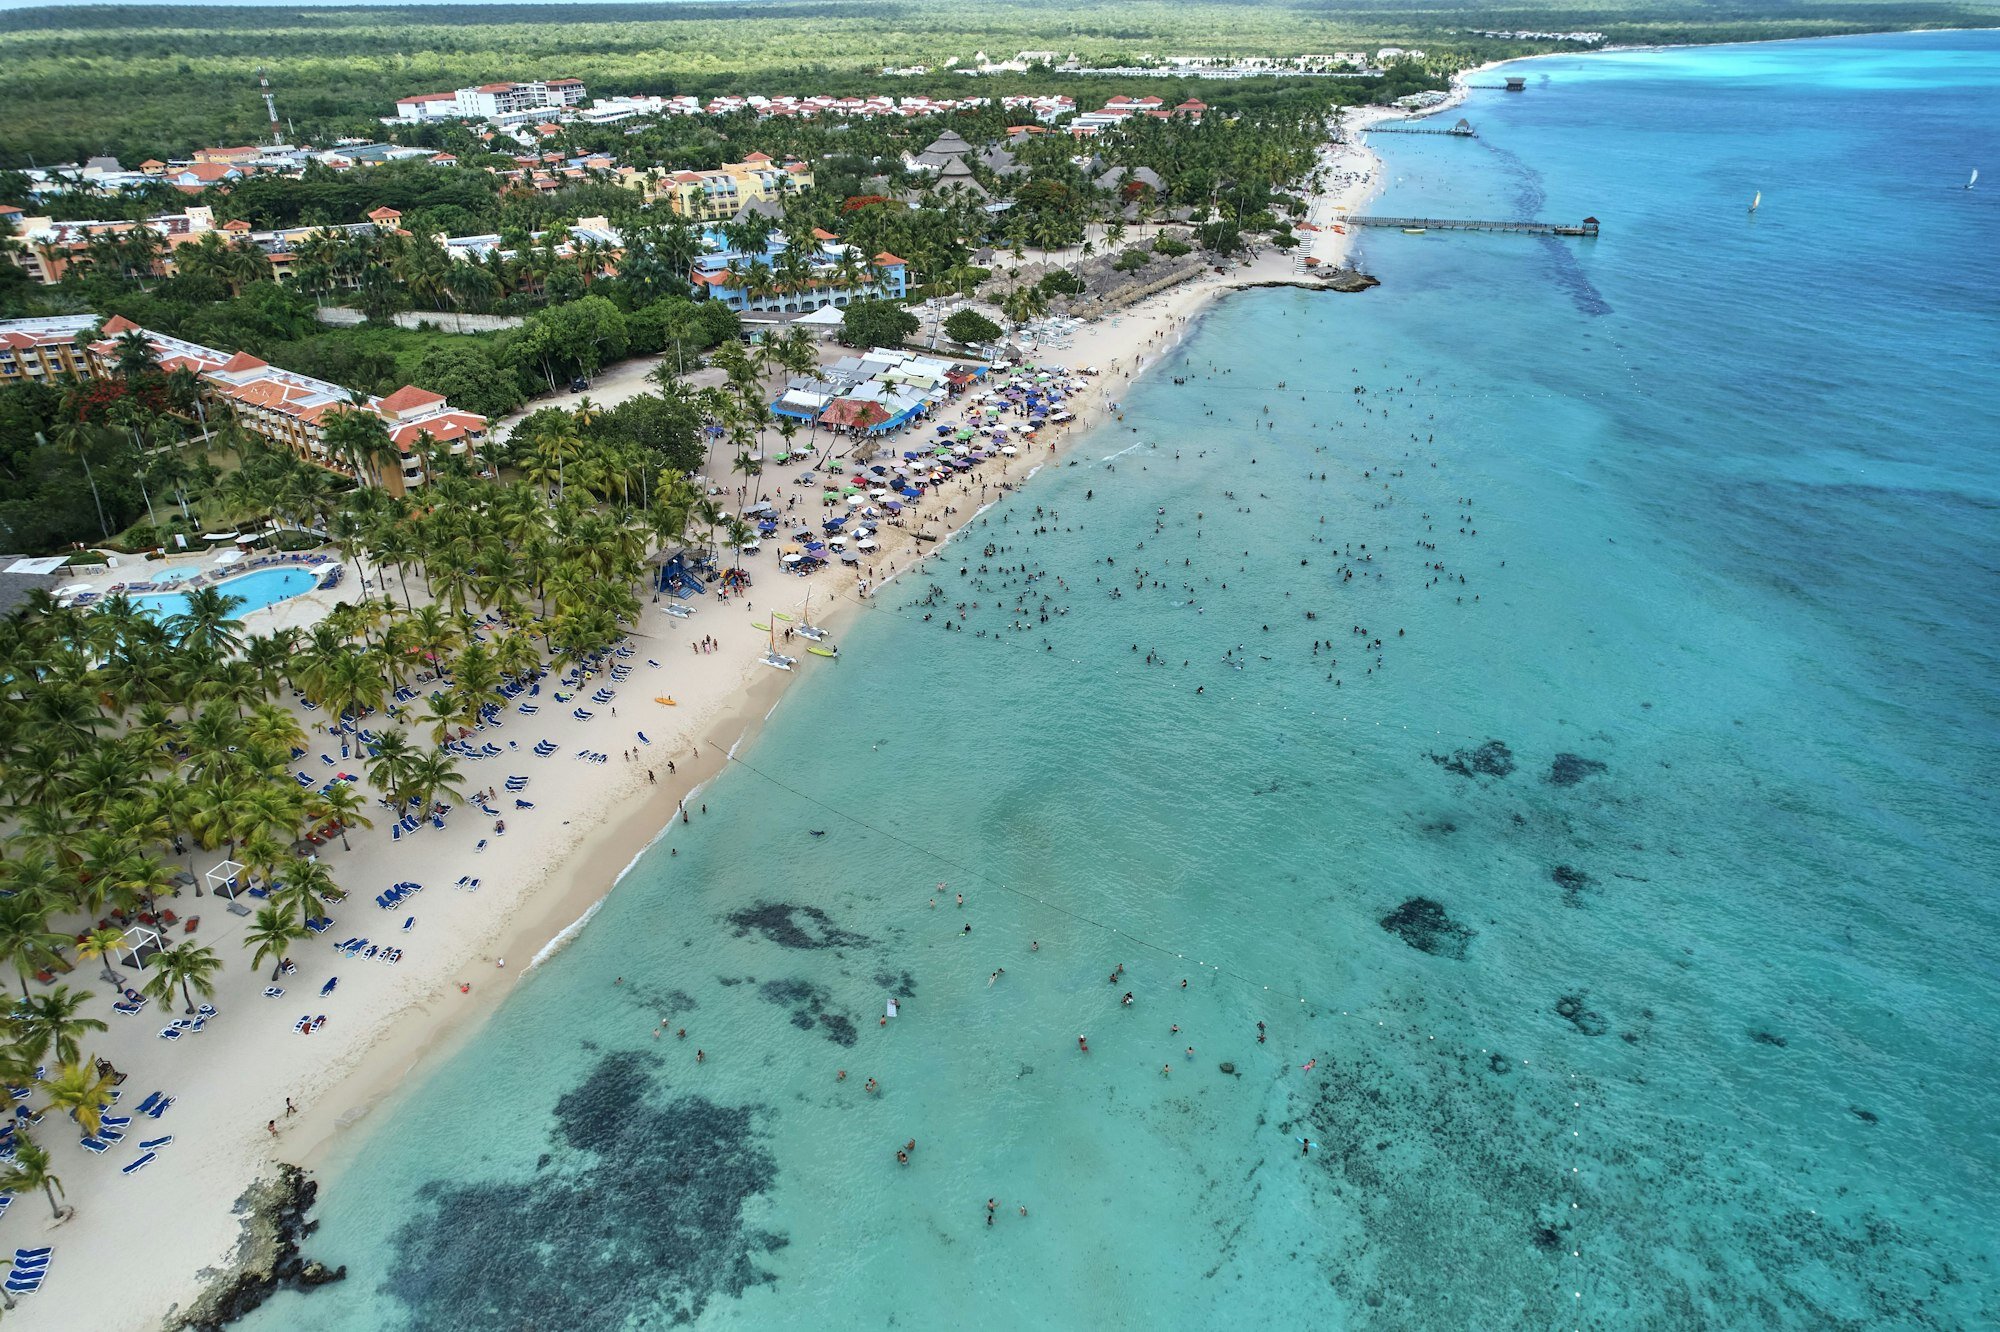 Aerial view of Dominicus Beach in Bayahibe, Dominican Republic